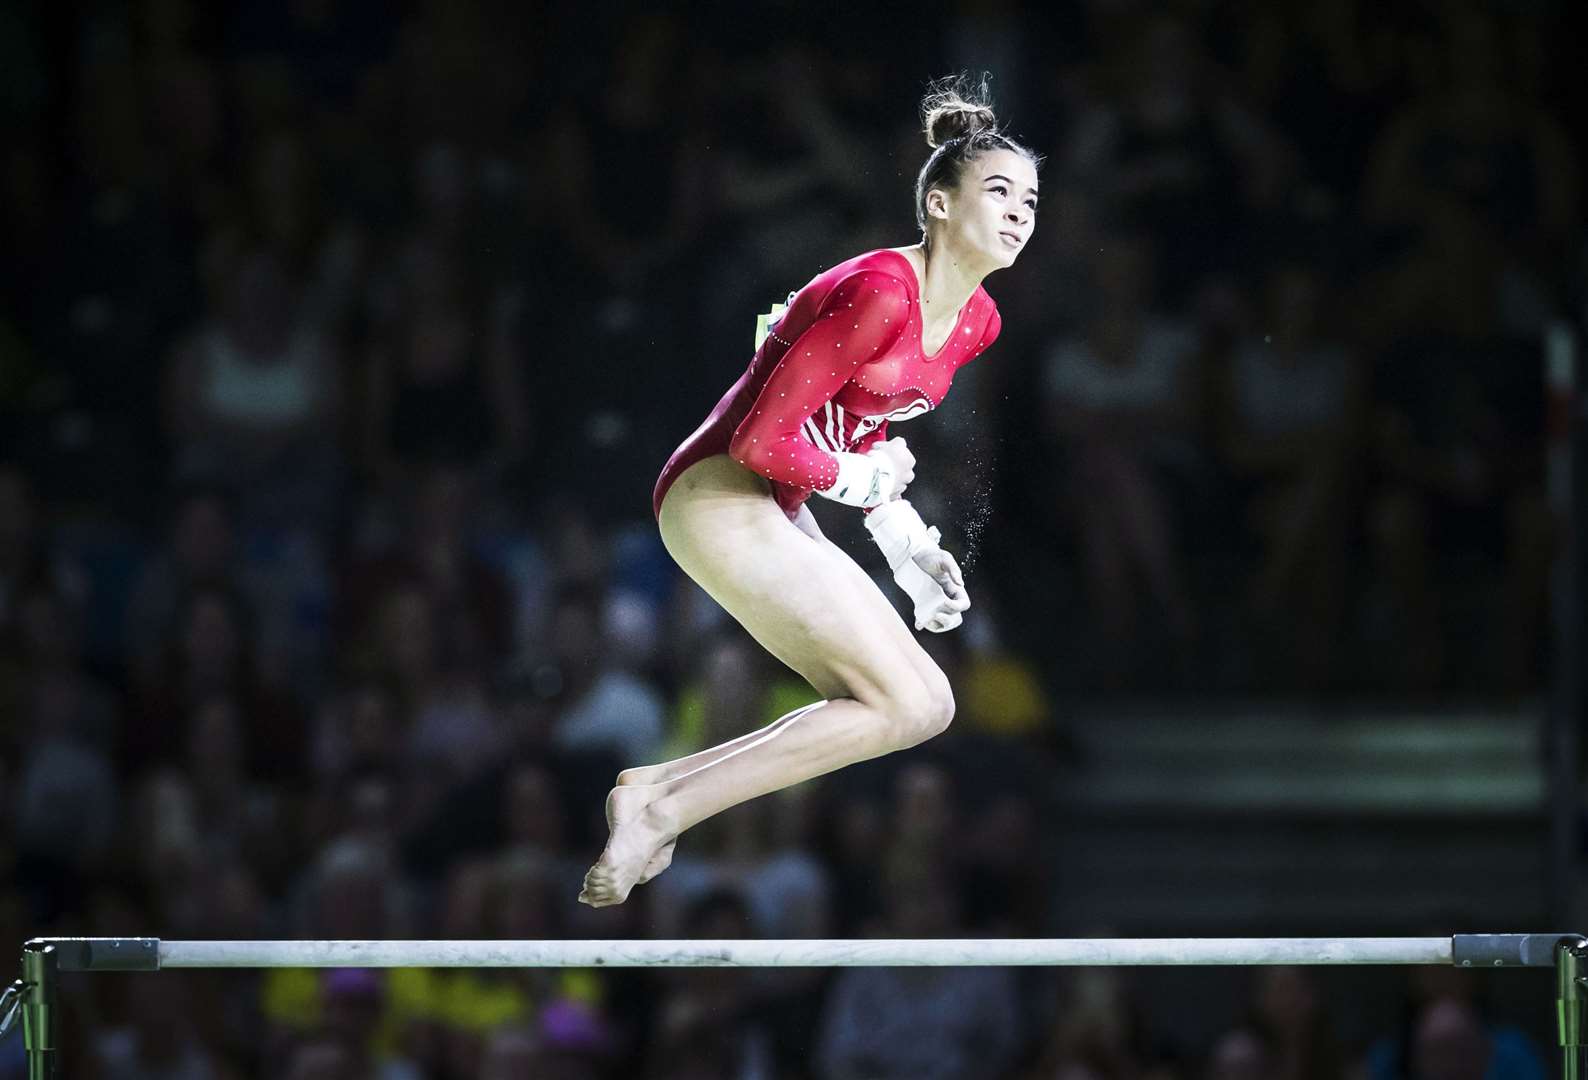 Georgia-Mae Fenton on her way to gold at the 2018 Commonwealth Games in Australia. Picture: Danny Lawson/PA Wire